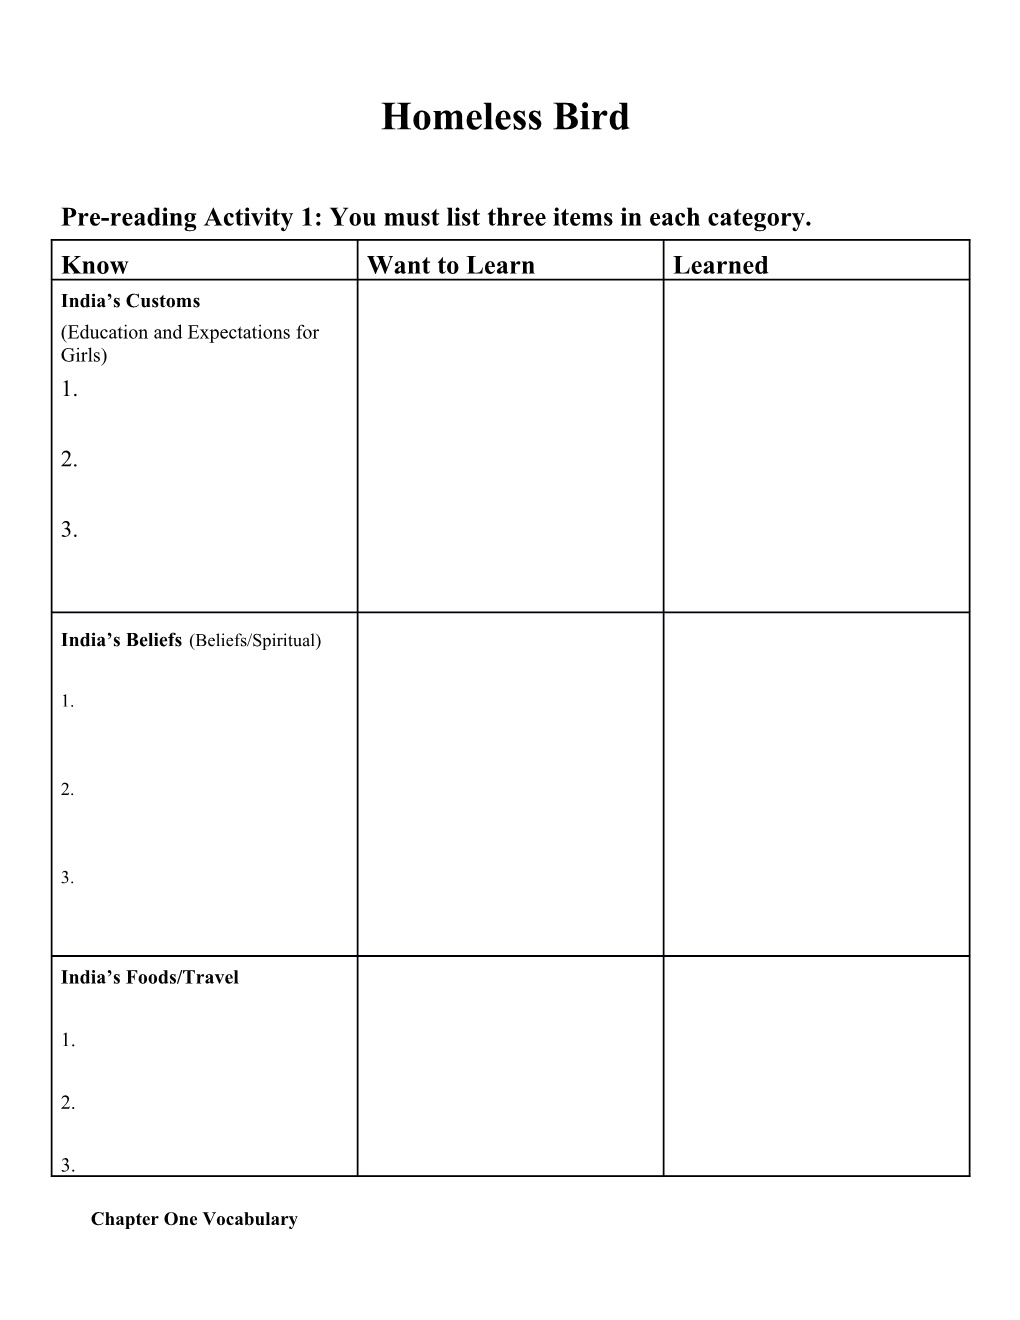 Pre-Reading Activity 1: You Must List Three Items in Each Category